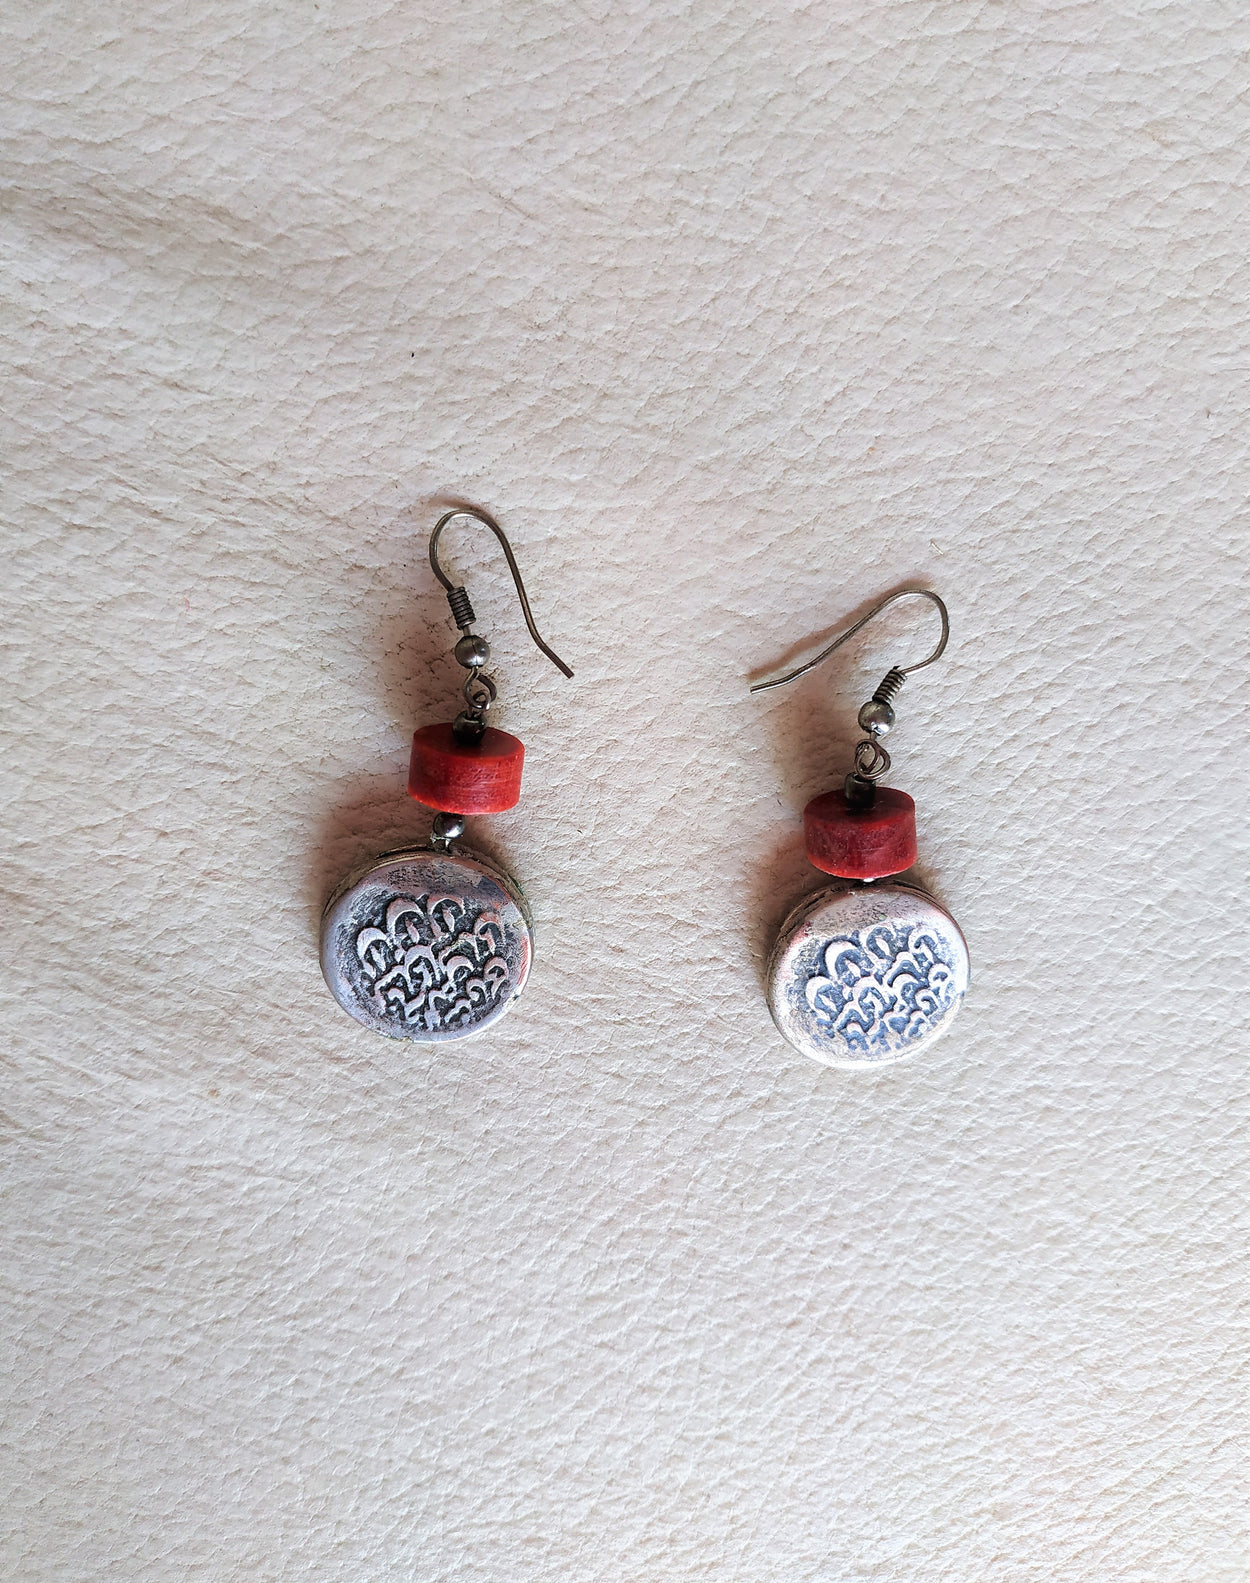 Handmade set of "old coins". Earrings with coral 